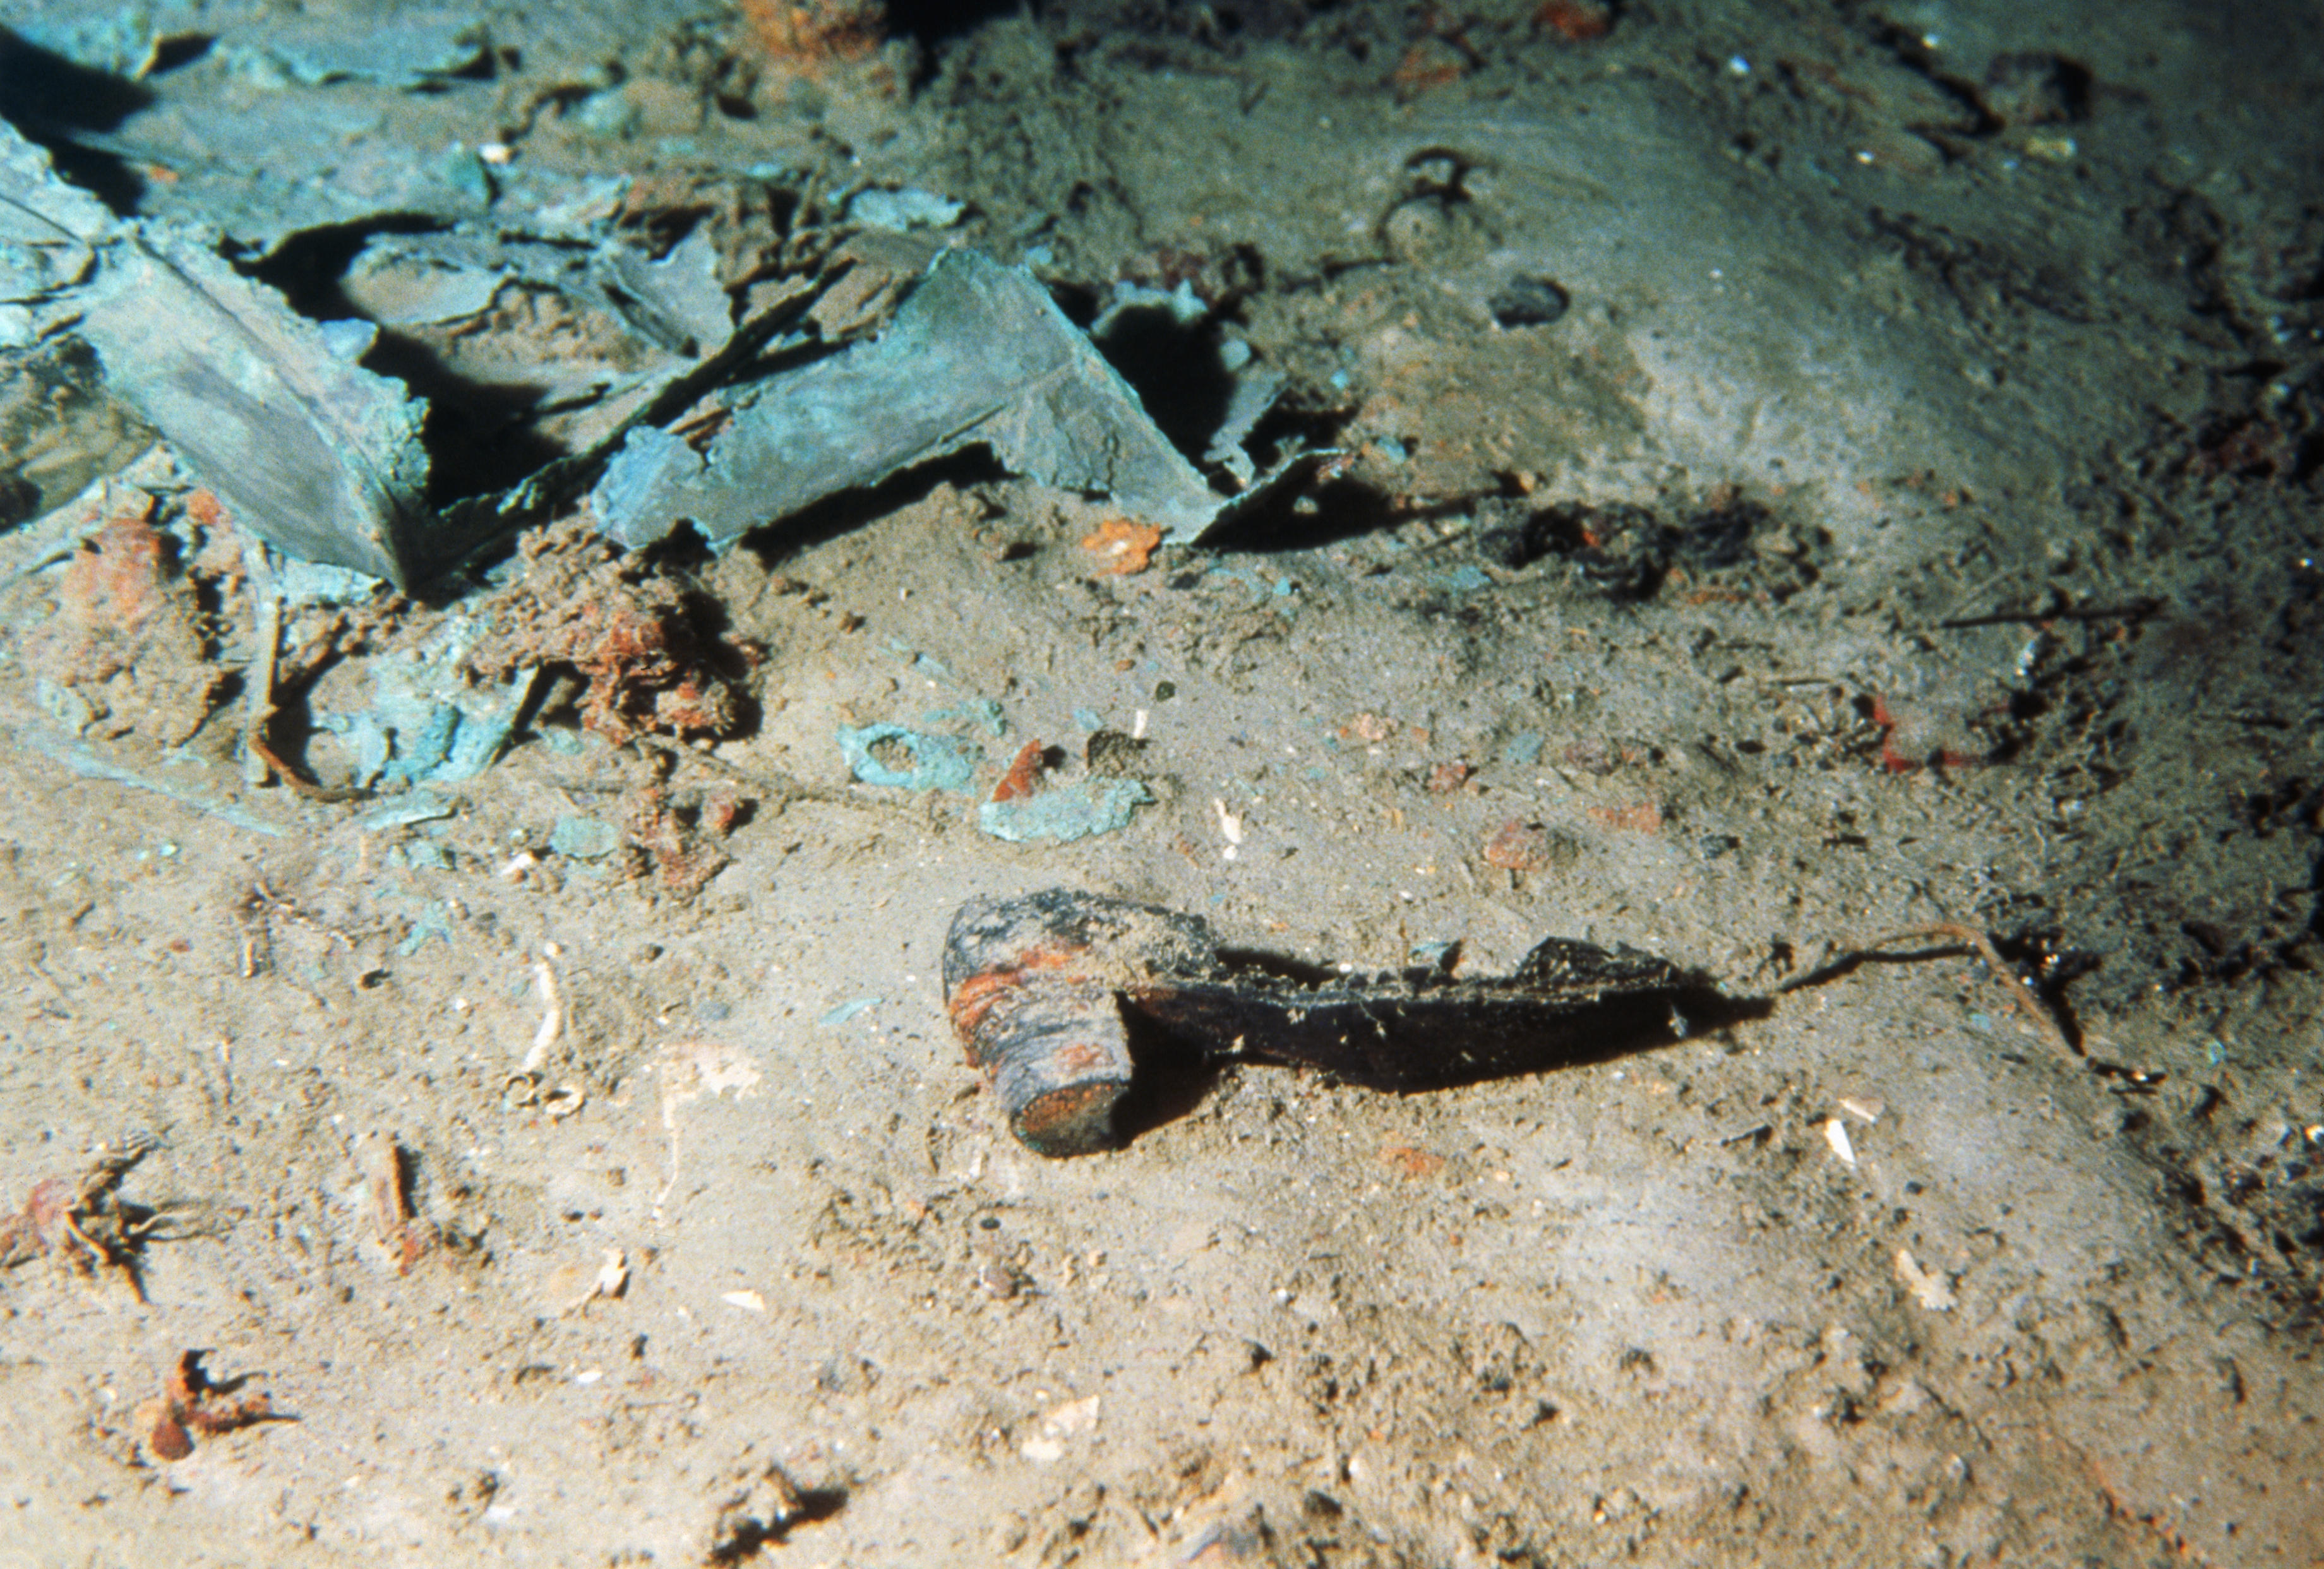 Items at the bottom of the ocean floor Titanic wreckage